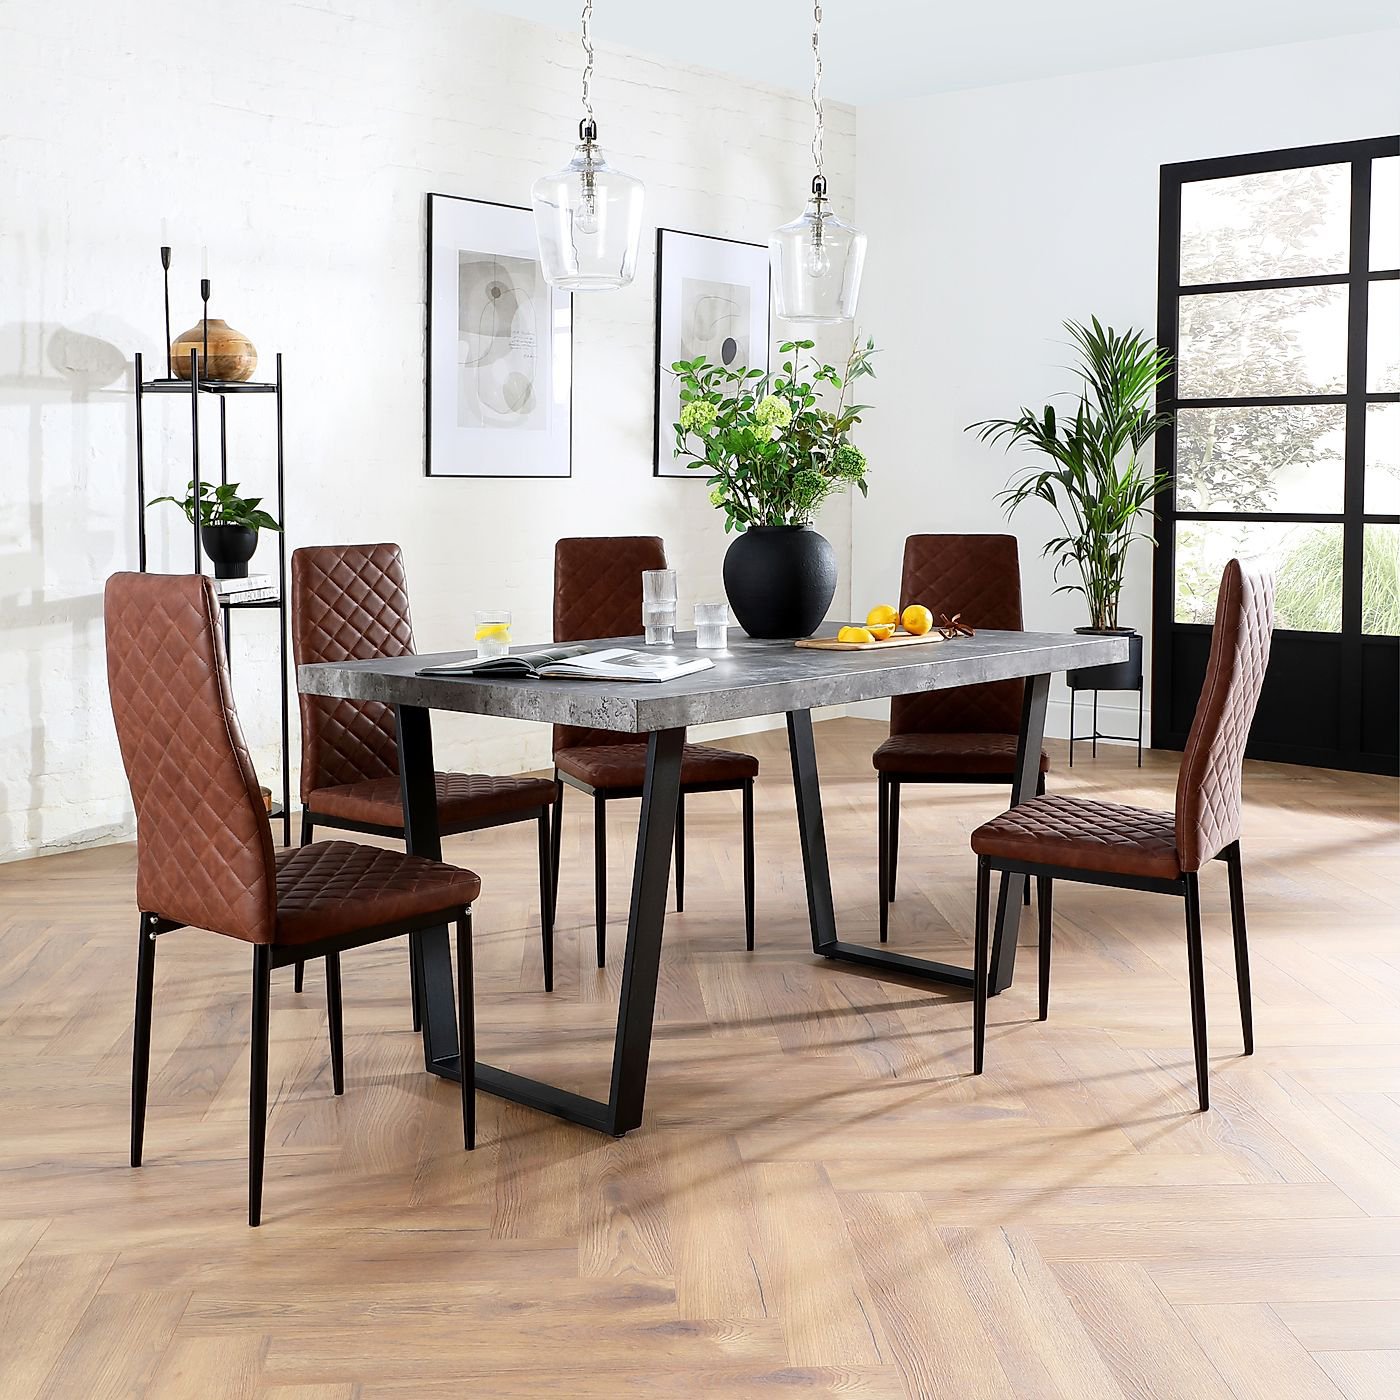 Addison 200cm Concrete Dining Table with 8 Renzo Tan Leather Chairs